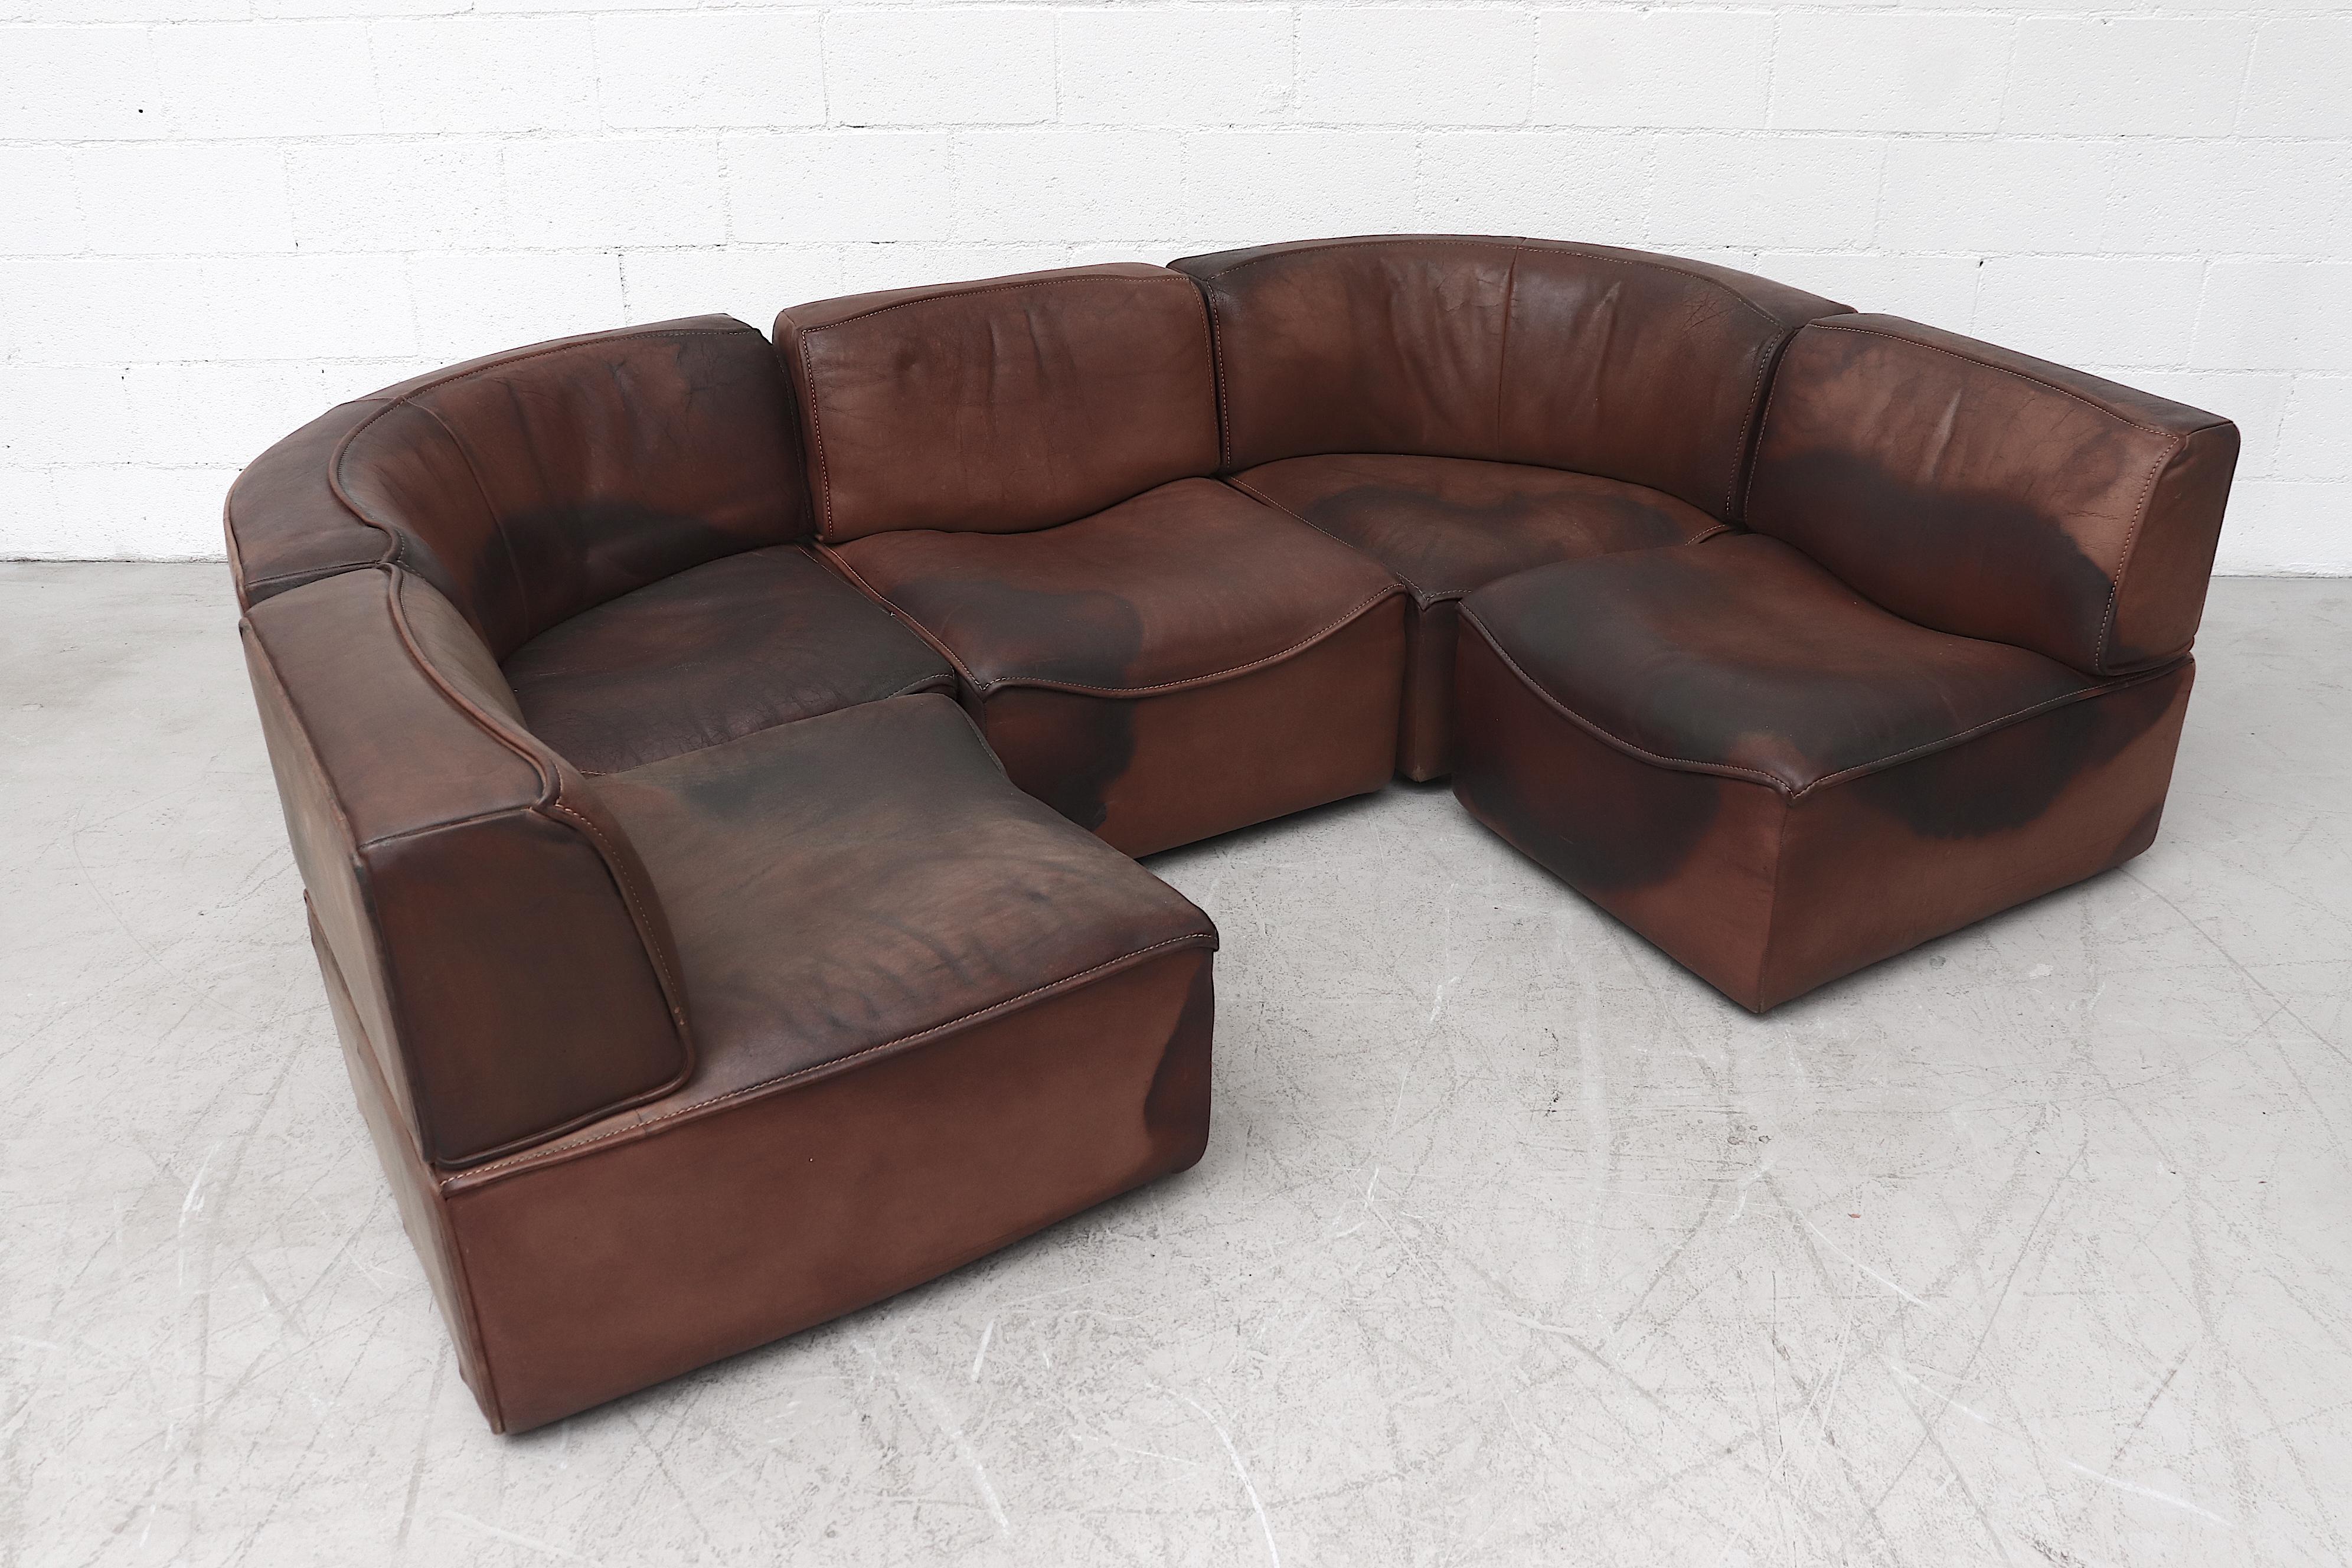 Gorgeous well loved De Sede 'DS15' five section buffalo leather sofa. Consisting of two corner seats and three straight sections that allow for multiple configurations. Handsome sectional with nice heavy patina and visible wear. In original